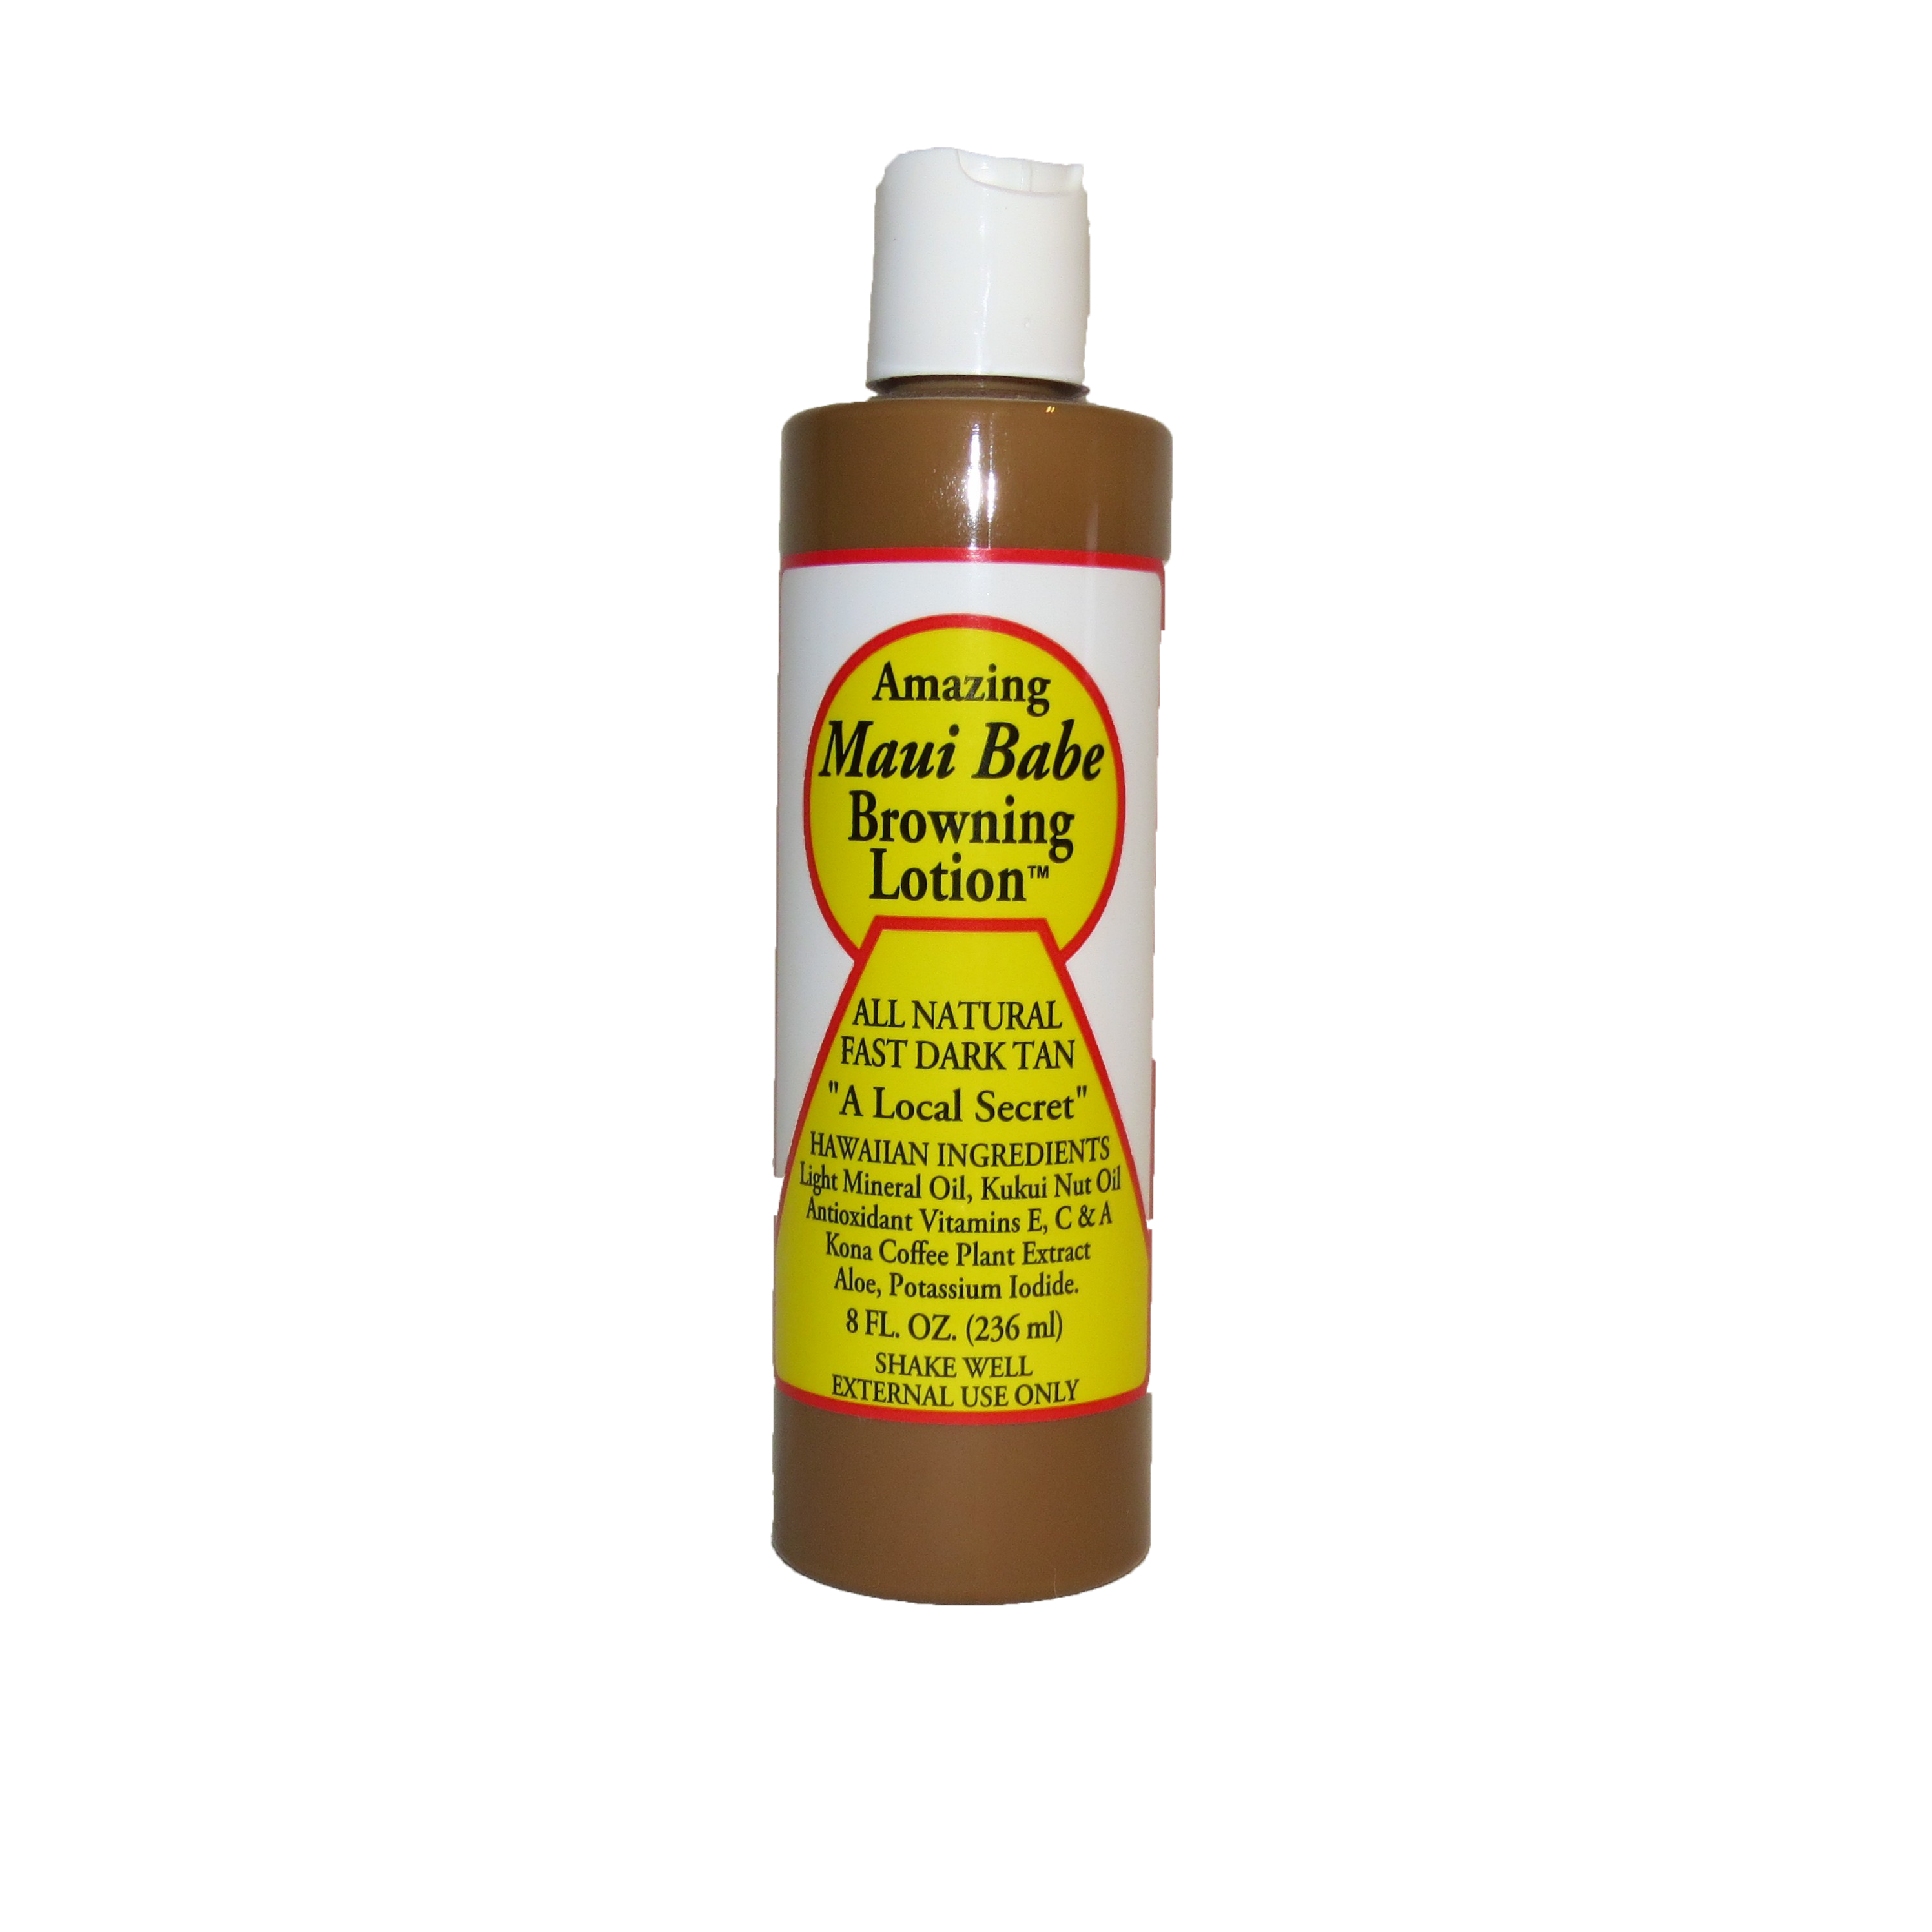 Maui Babe Browning Lotion - Cozzies Swimwear & Lingerie